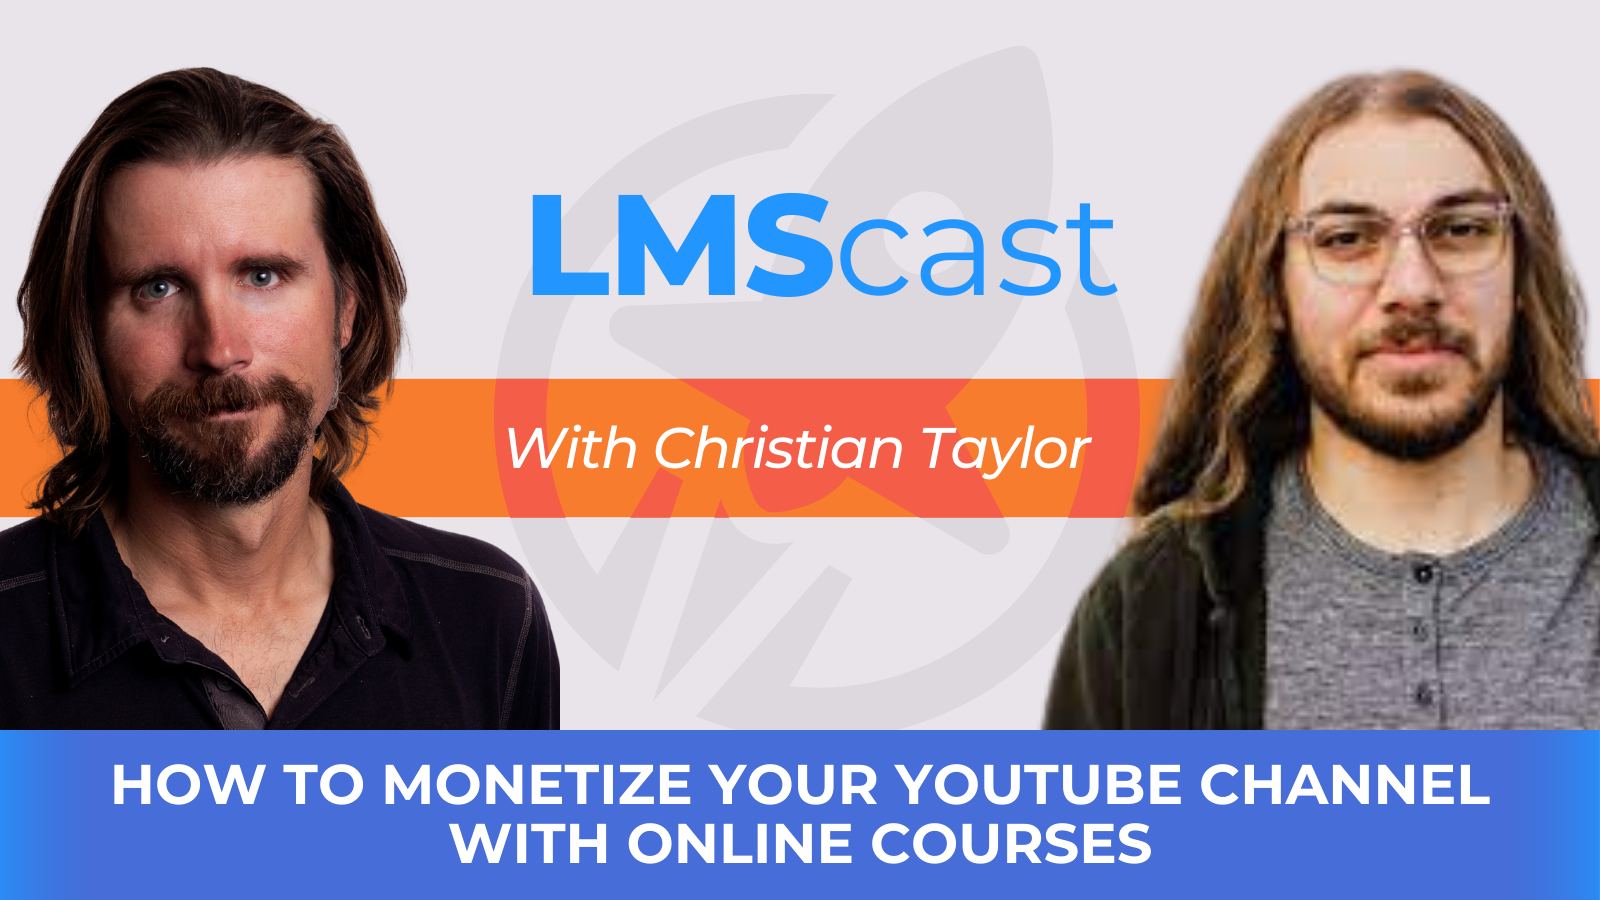 How to Monetize Your YouTube Channel with Online Courses with Christian Taylor